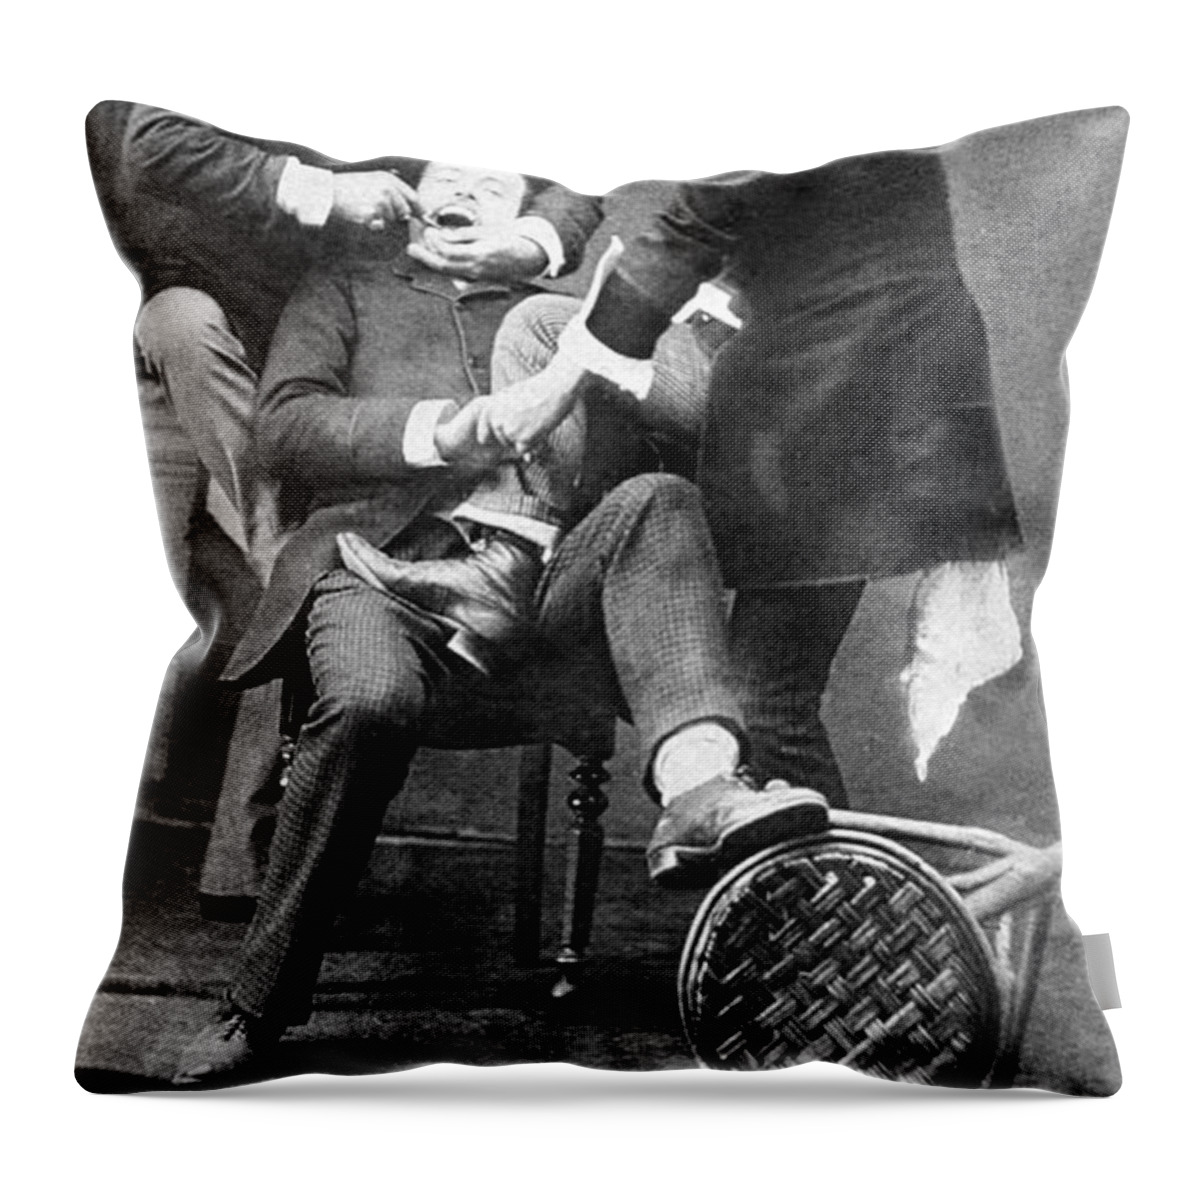 History Throw Pillow featuring the photograph Dentistry Tooth Extraction 1892 by Science Source